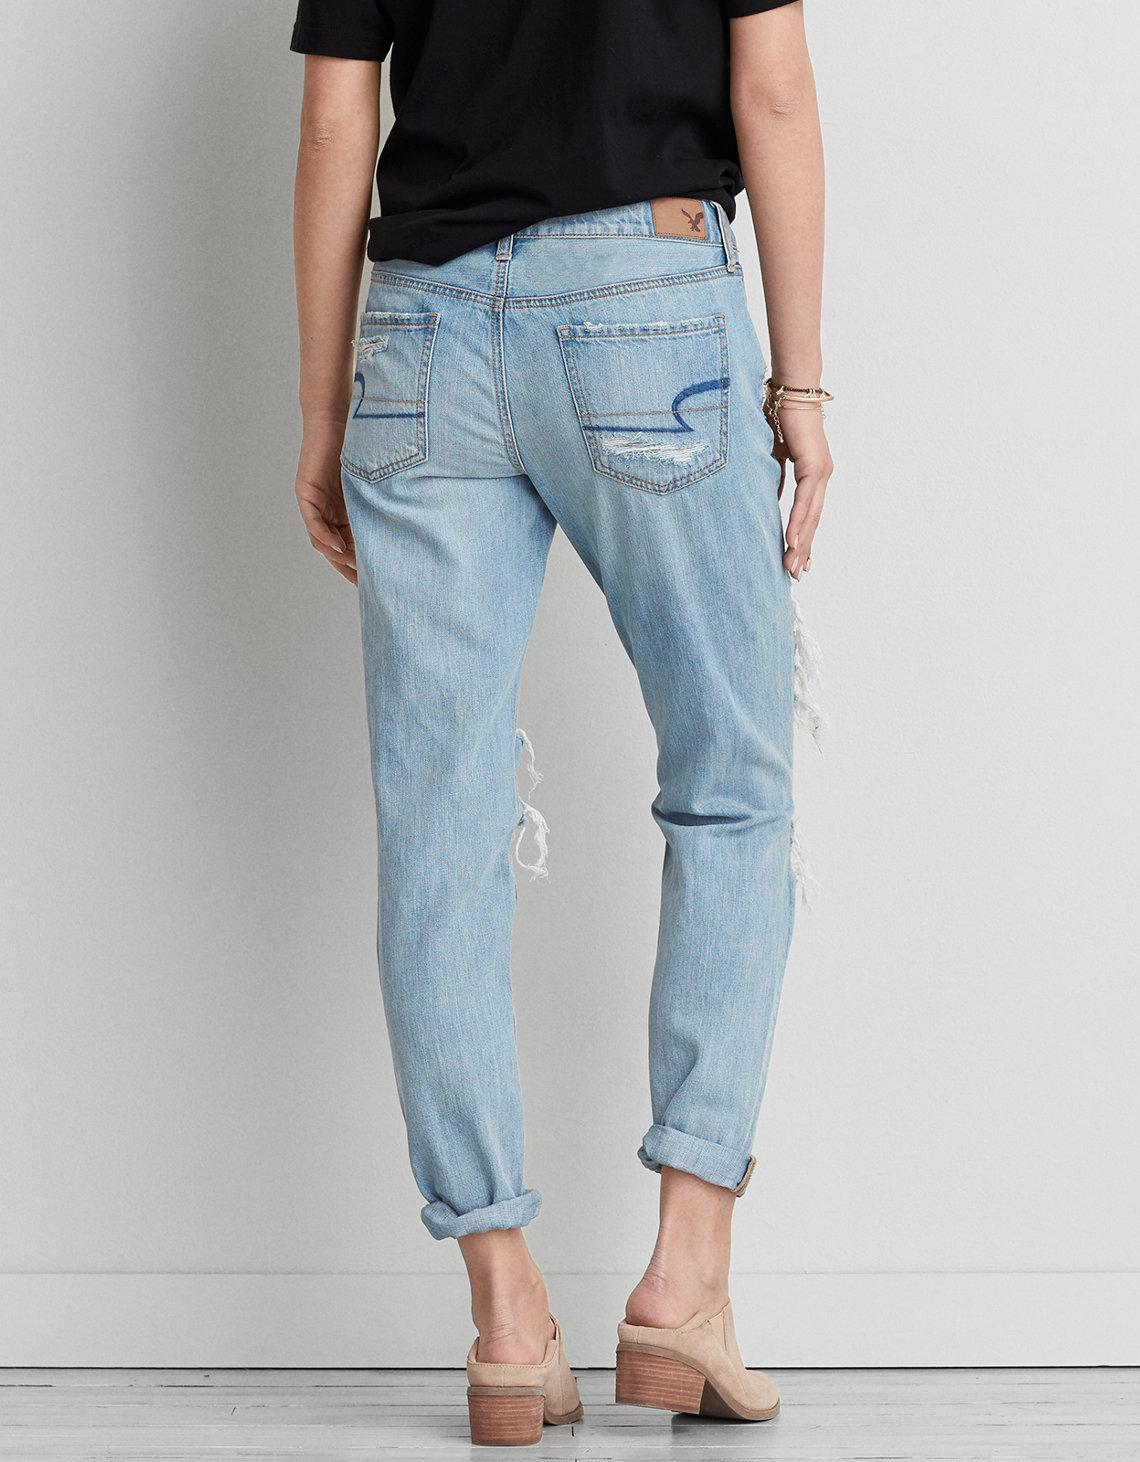 american eagle high waisted tomgirl jeans